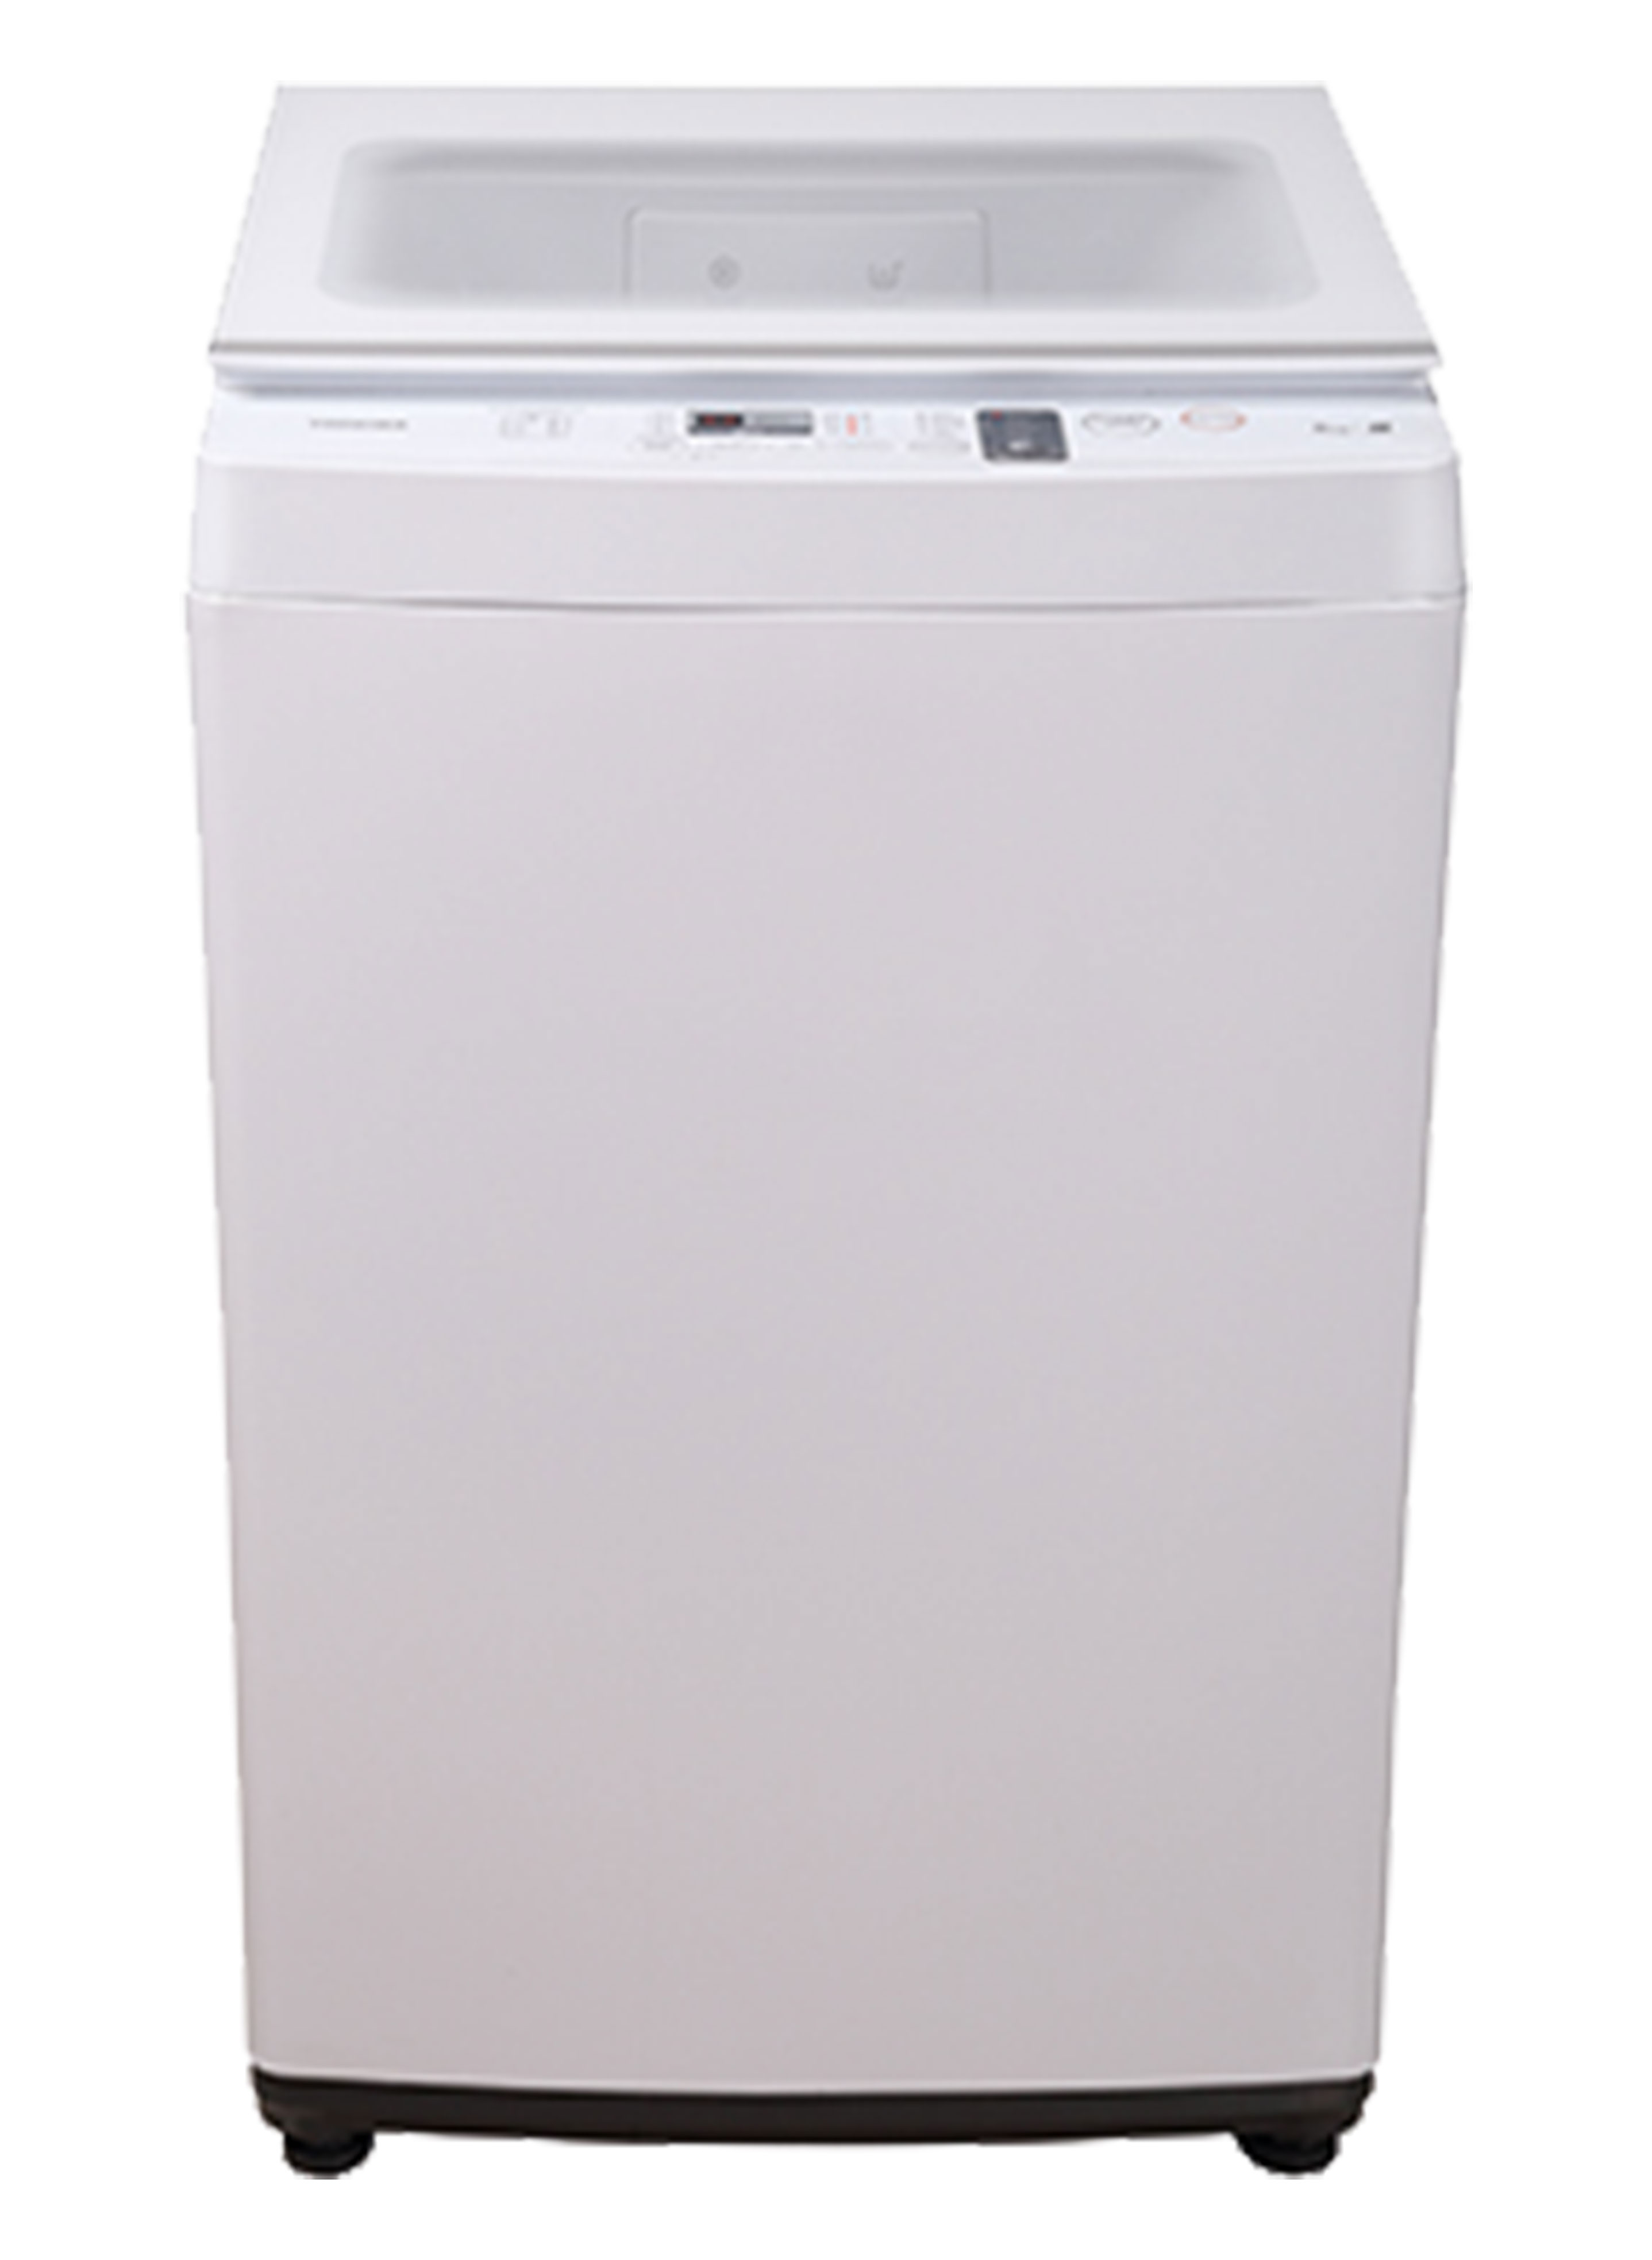  7 KG, TOP LOAD WASHER WITH FRAGRANCE COURSE